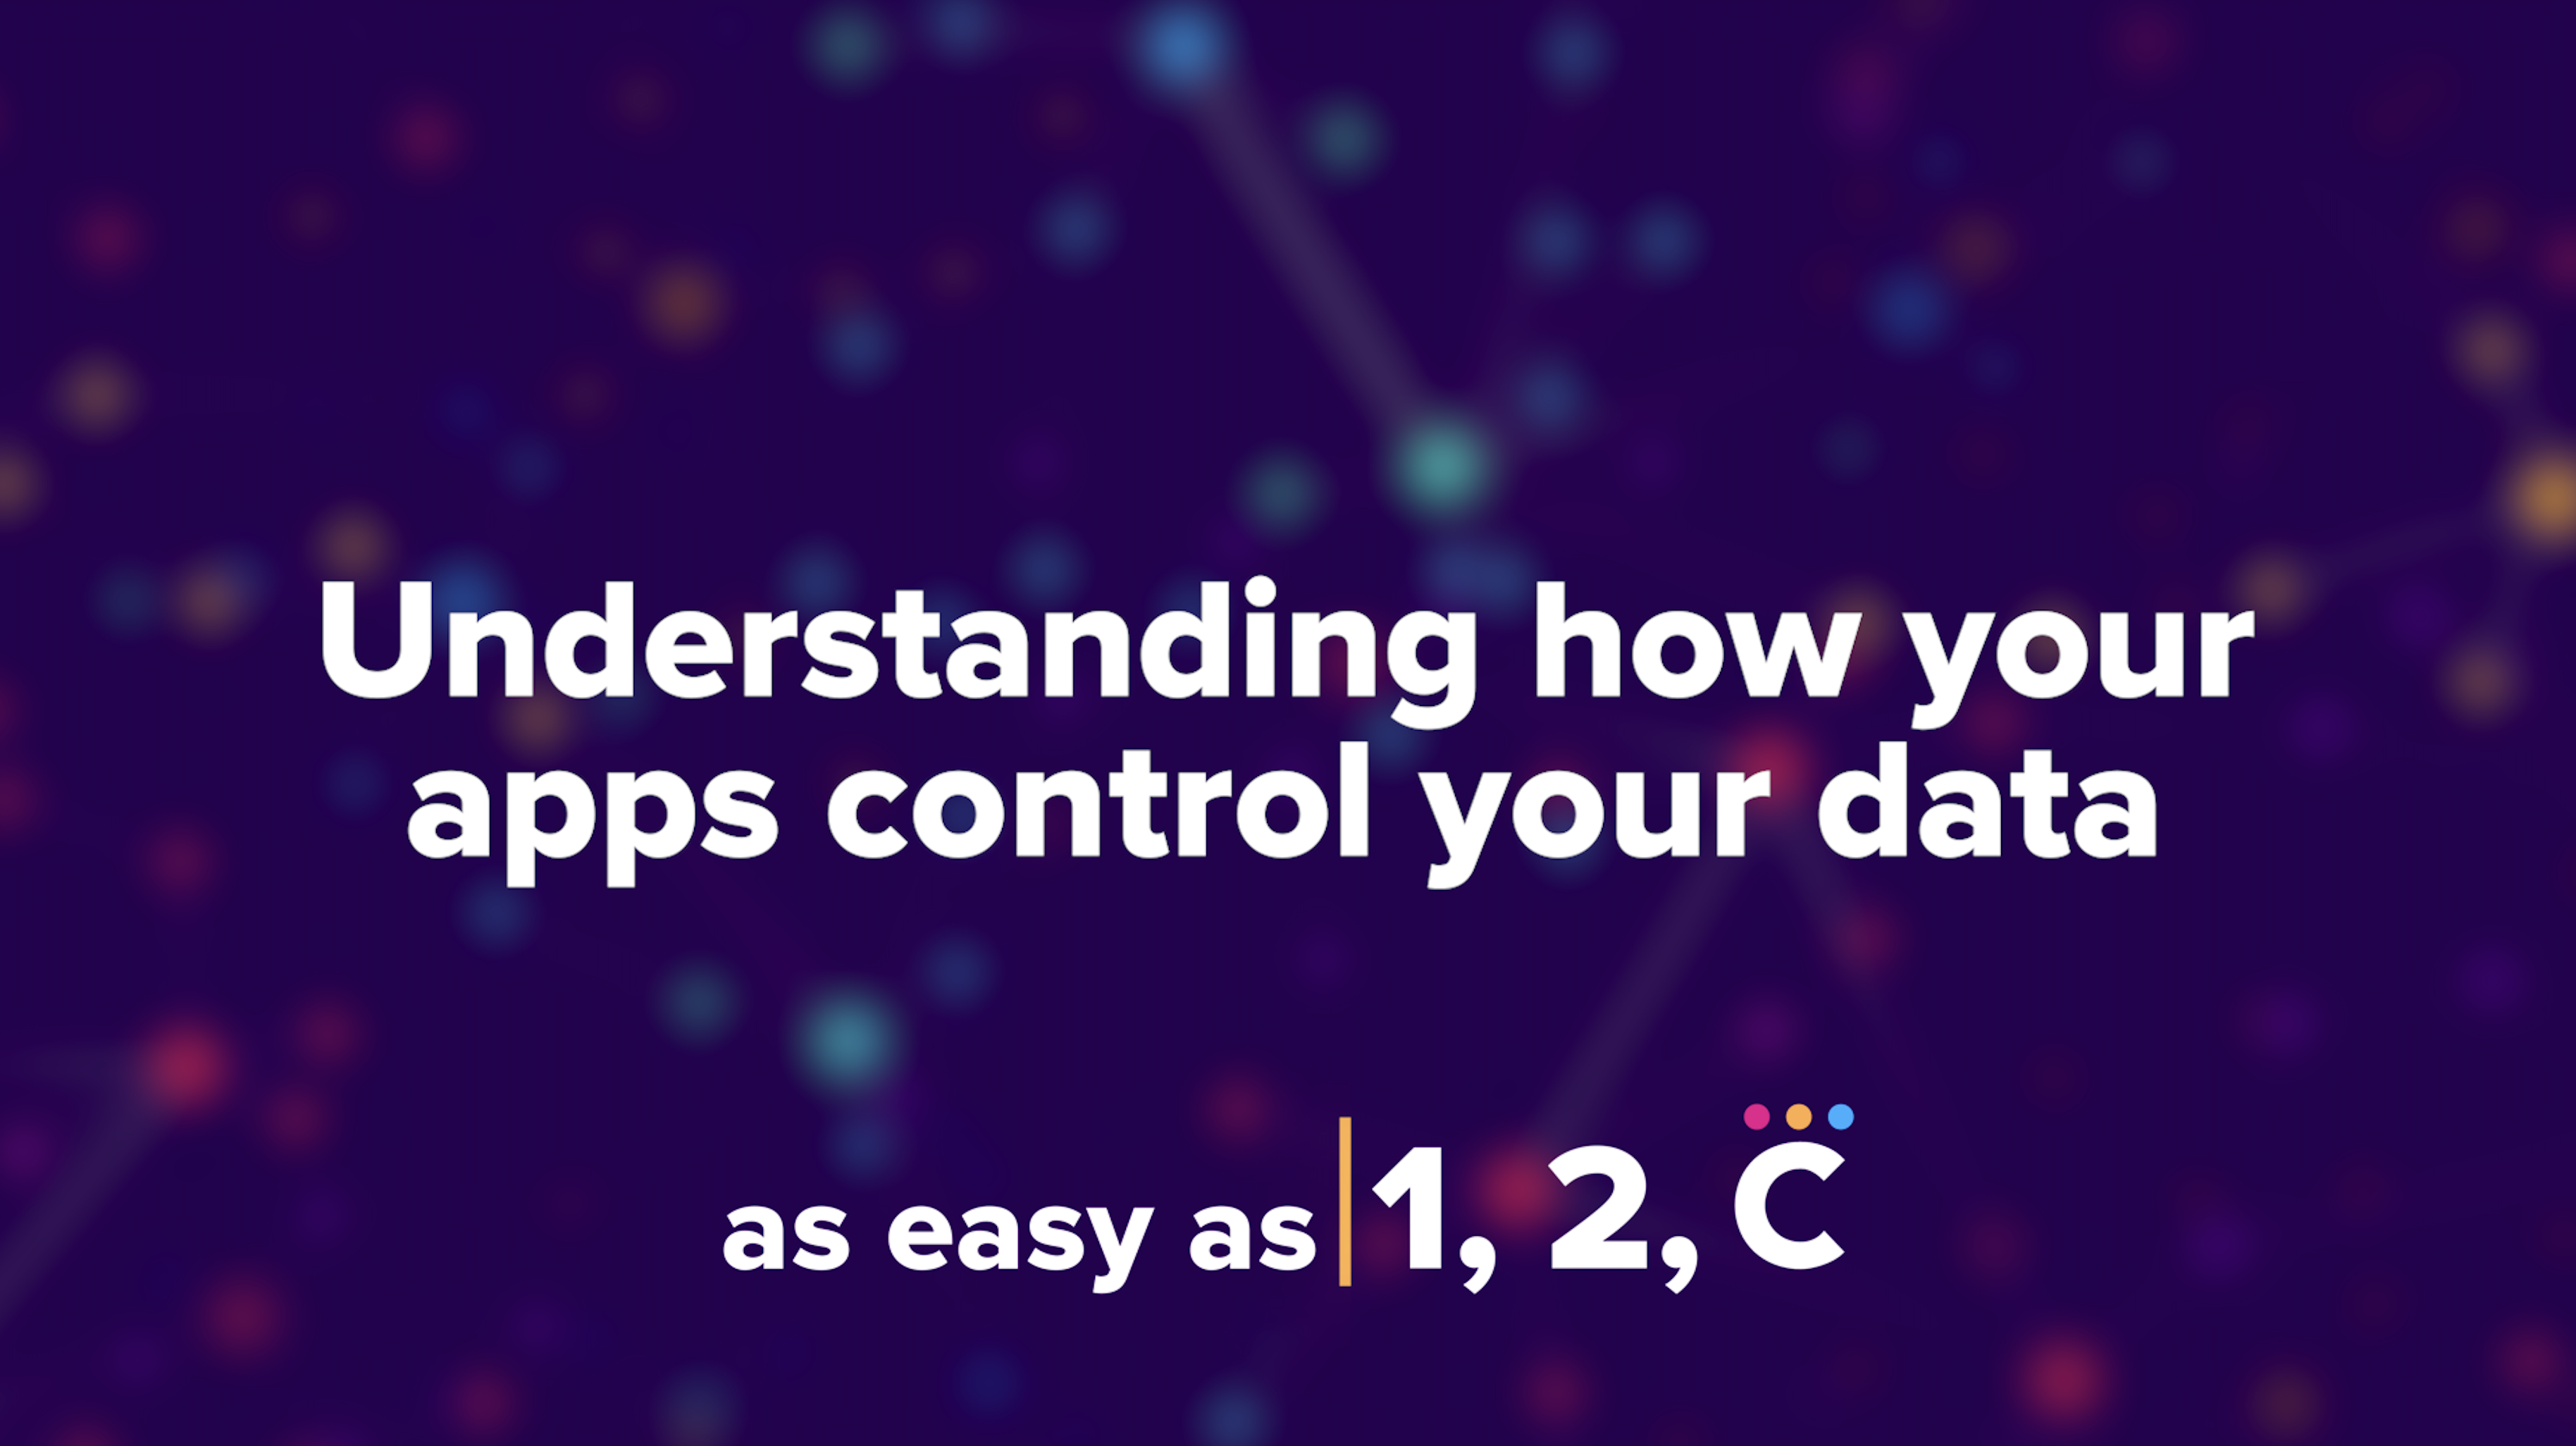 As Easy As 1, 2, C: Understanding How Your Apps Control Your Data